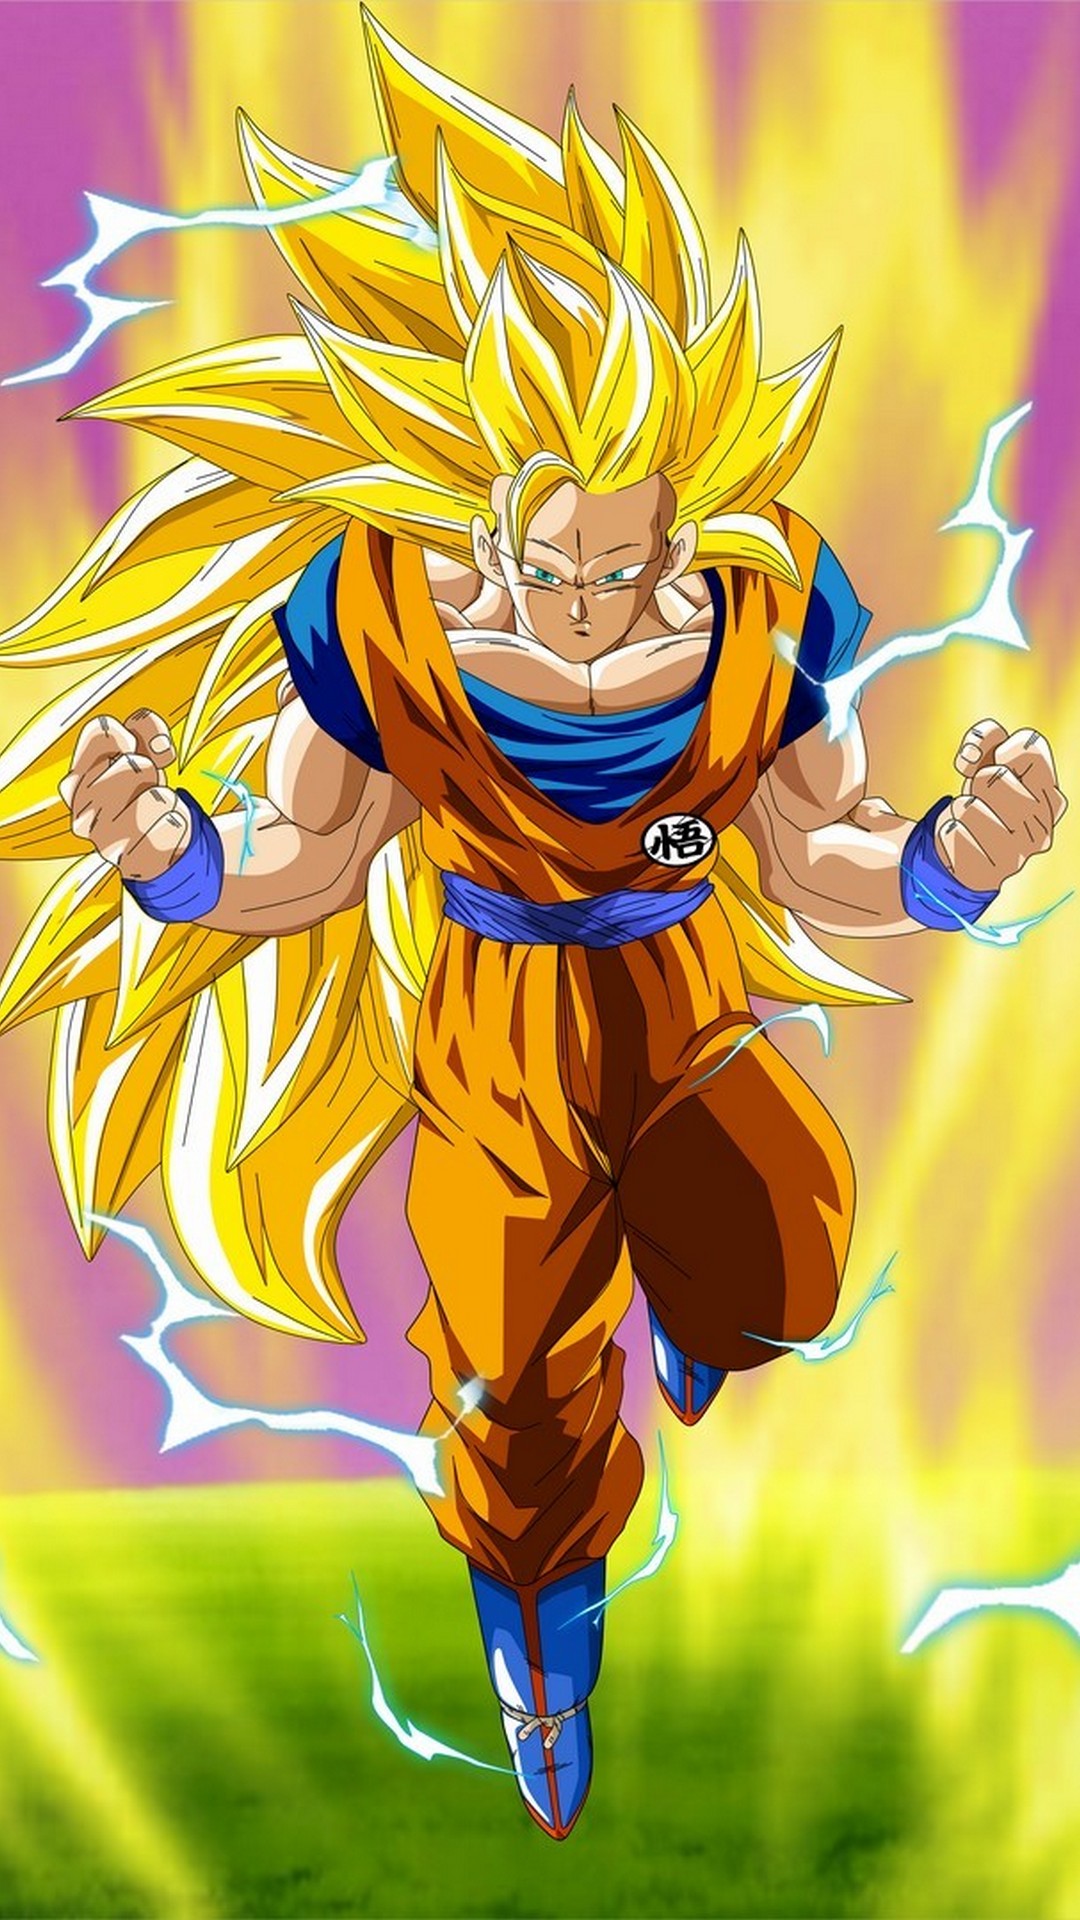 Goku SSJ3 Android Wallpaper with HD resolution 1080x1920